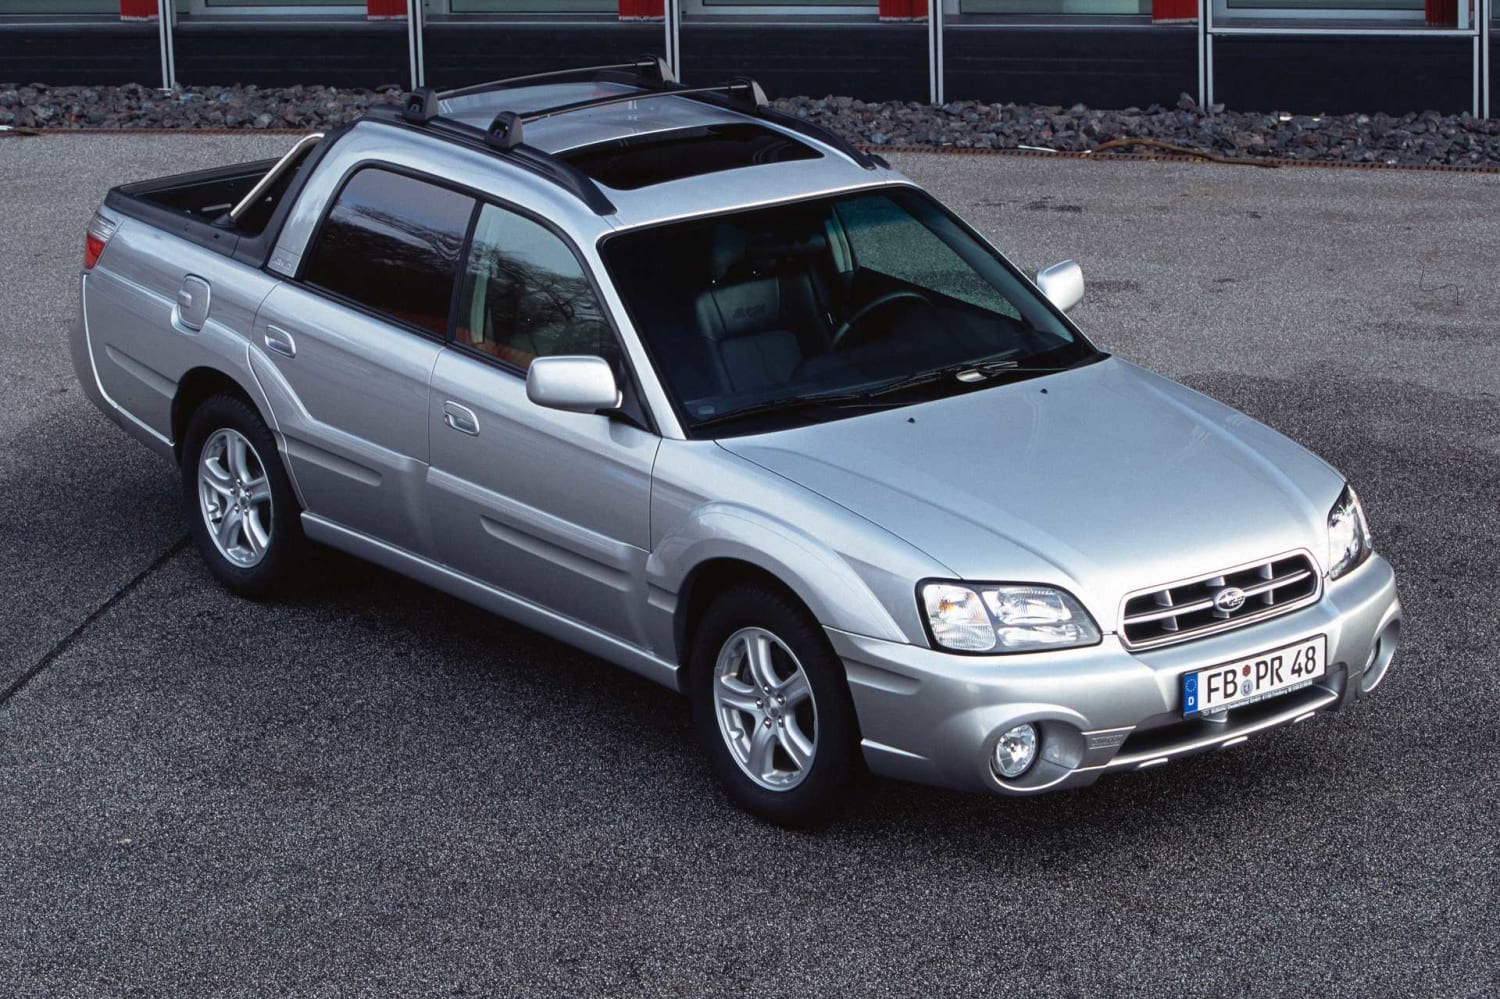 The Subaru Baja. One of Subaru's most controversial designs, the Baja was manufactured for only four years (2002-2006).